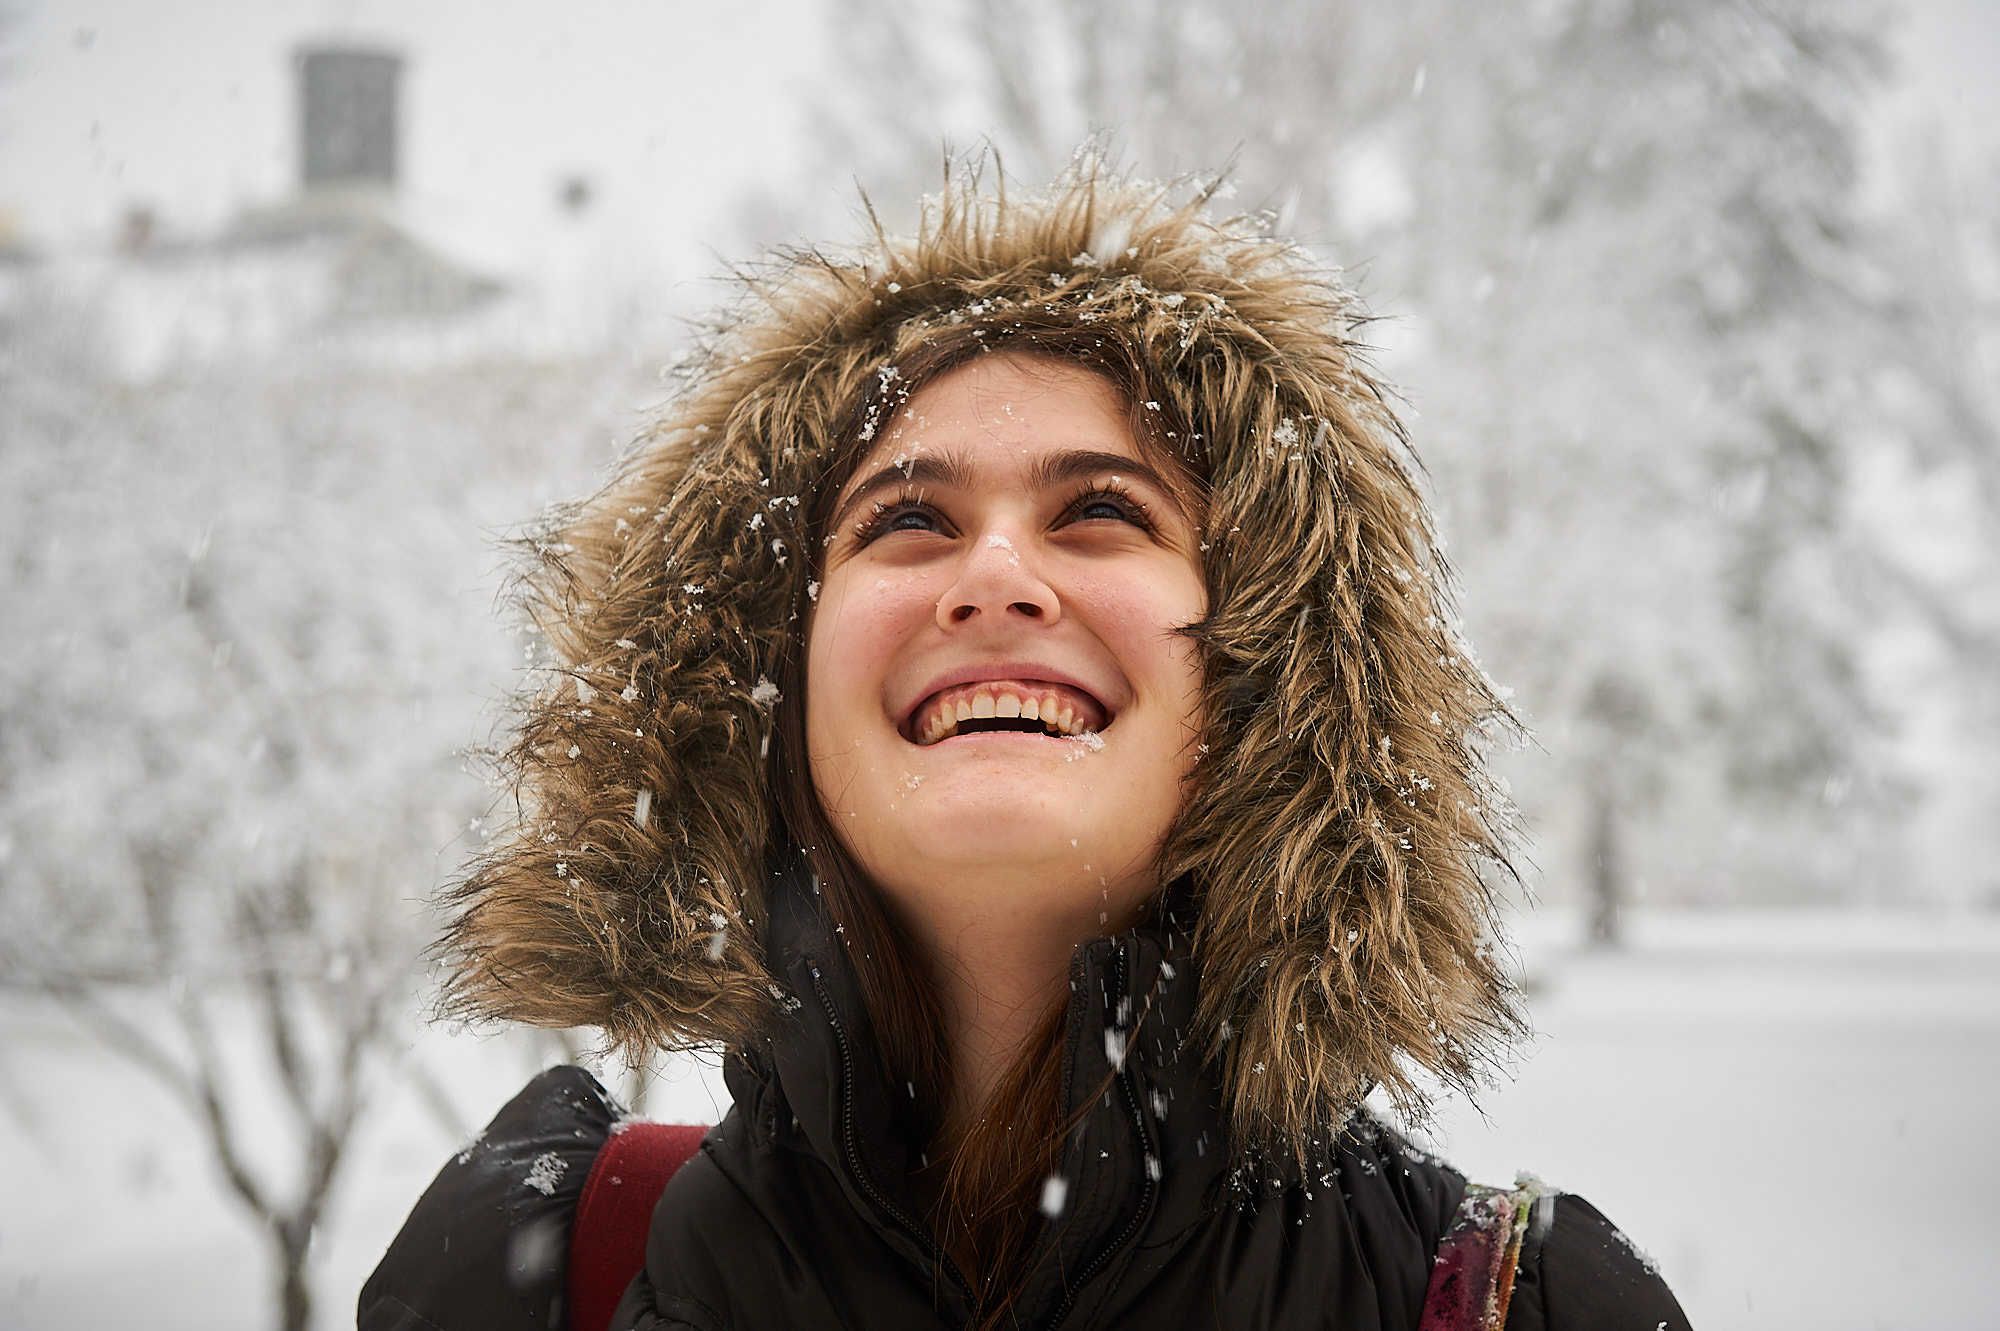 Michelle Cullen, Colgate University Class of 2015, from Atlanta, Georgia experiences her first snow storm on the Colgate University Campus